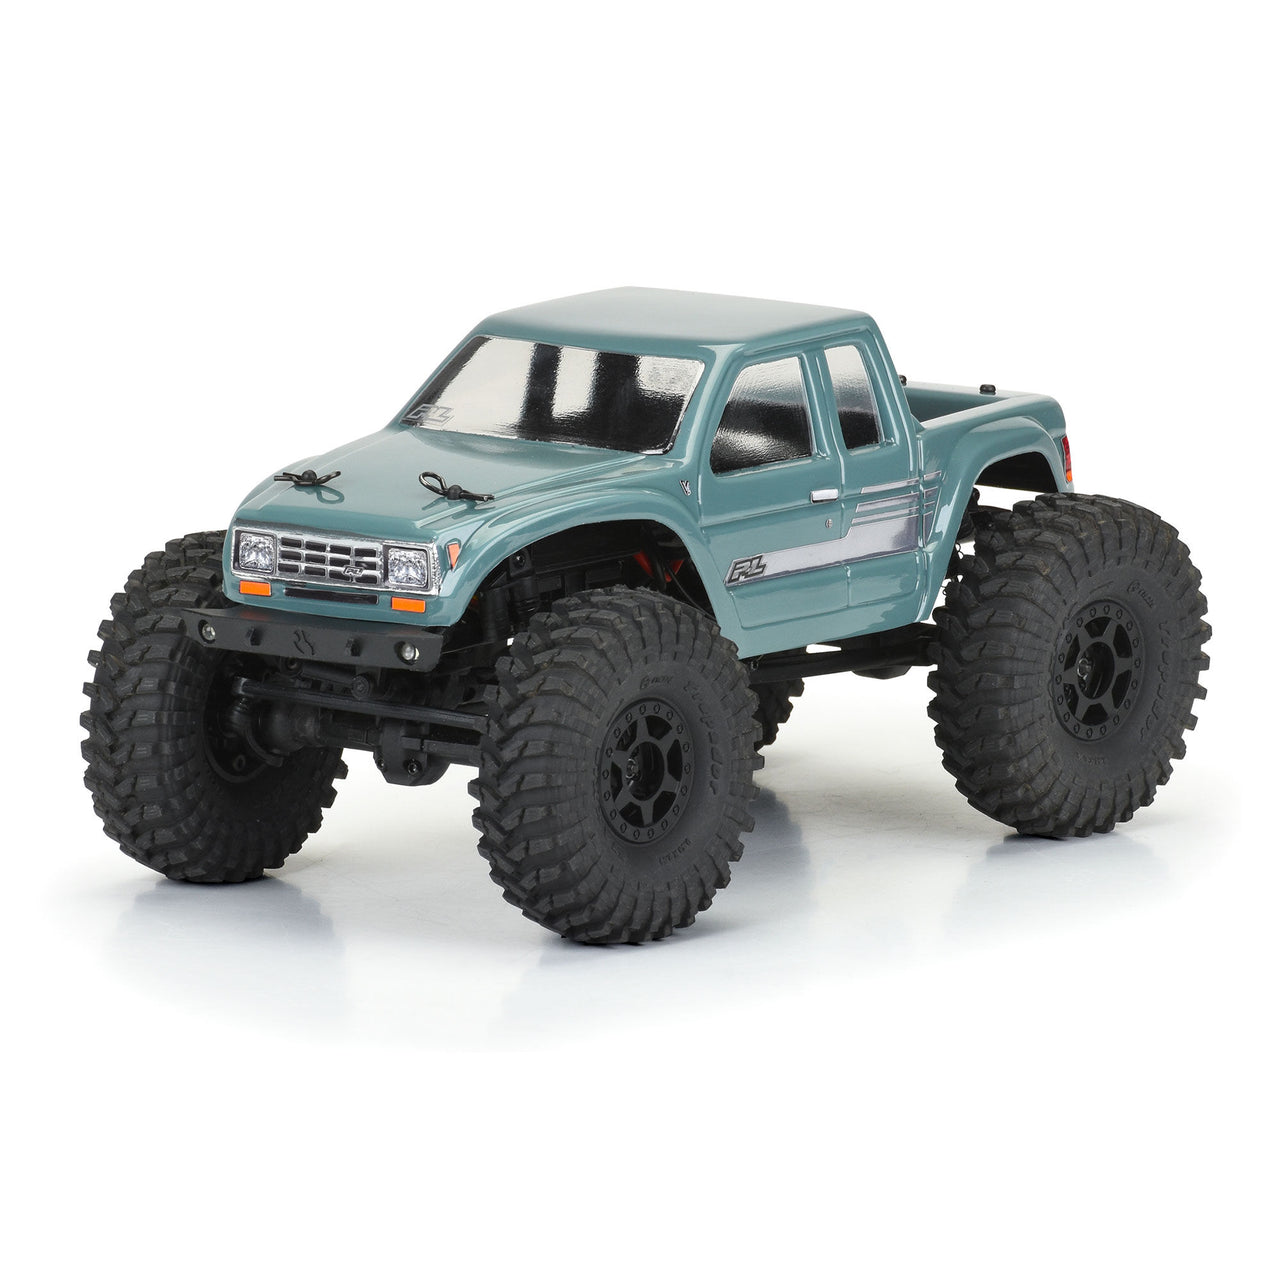 PRO363200 Proline 1/24 Coyote High Performance Clear Body: SCX24